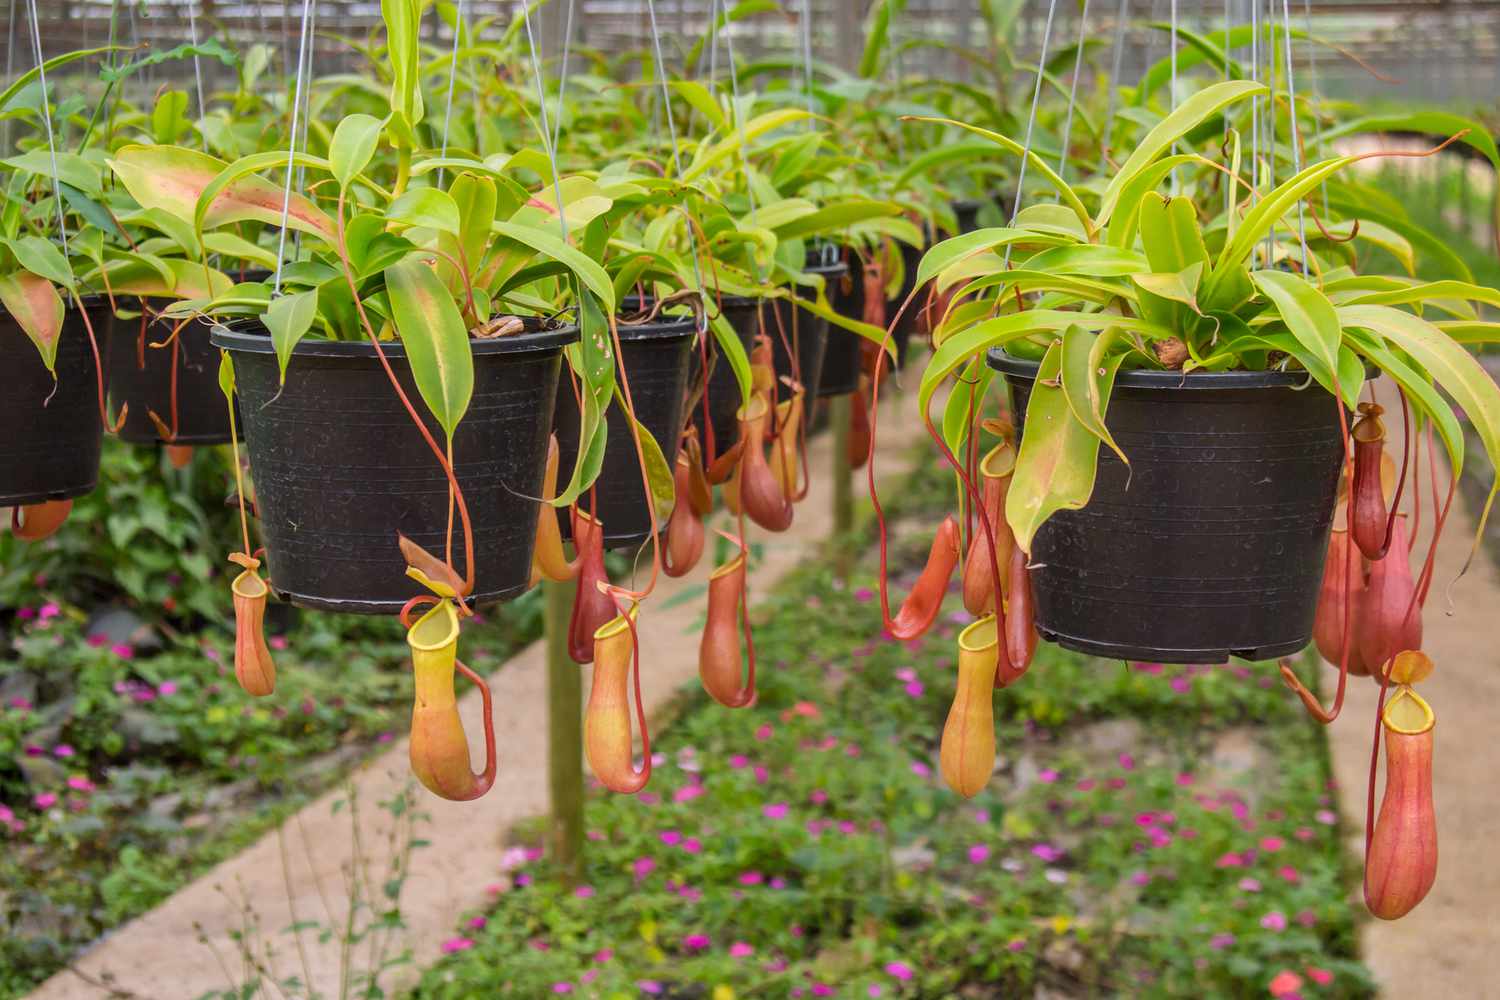 Nepenthes plants in hanging pots with their pitchers hanging down.